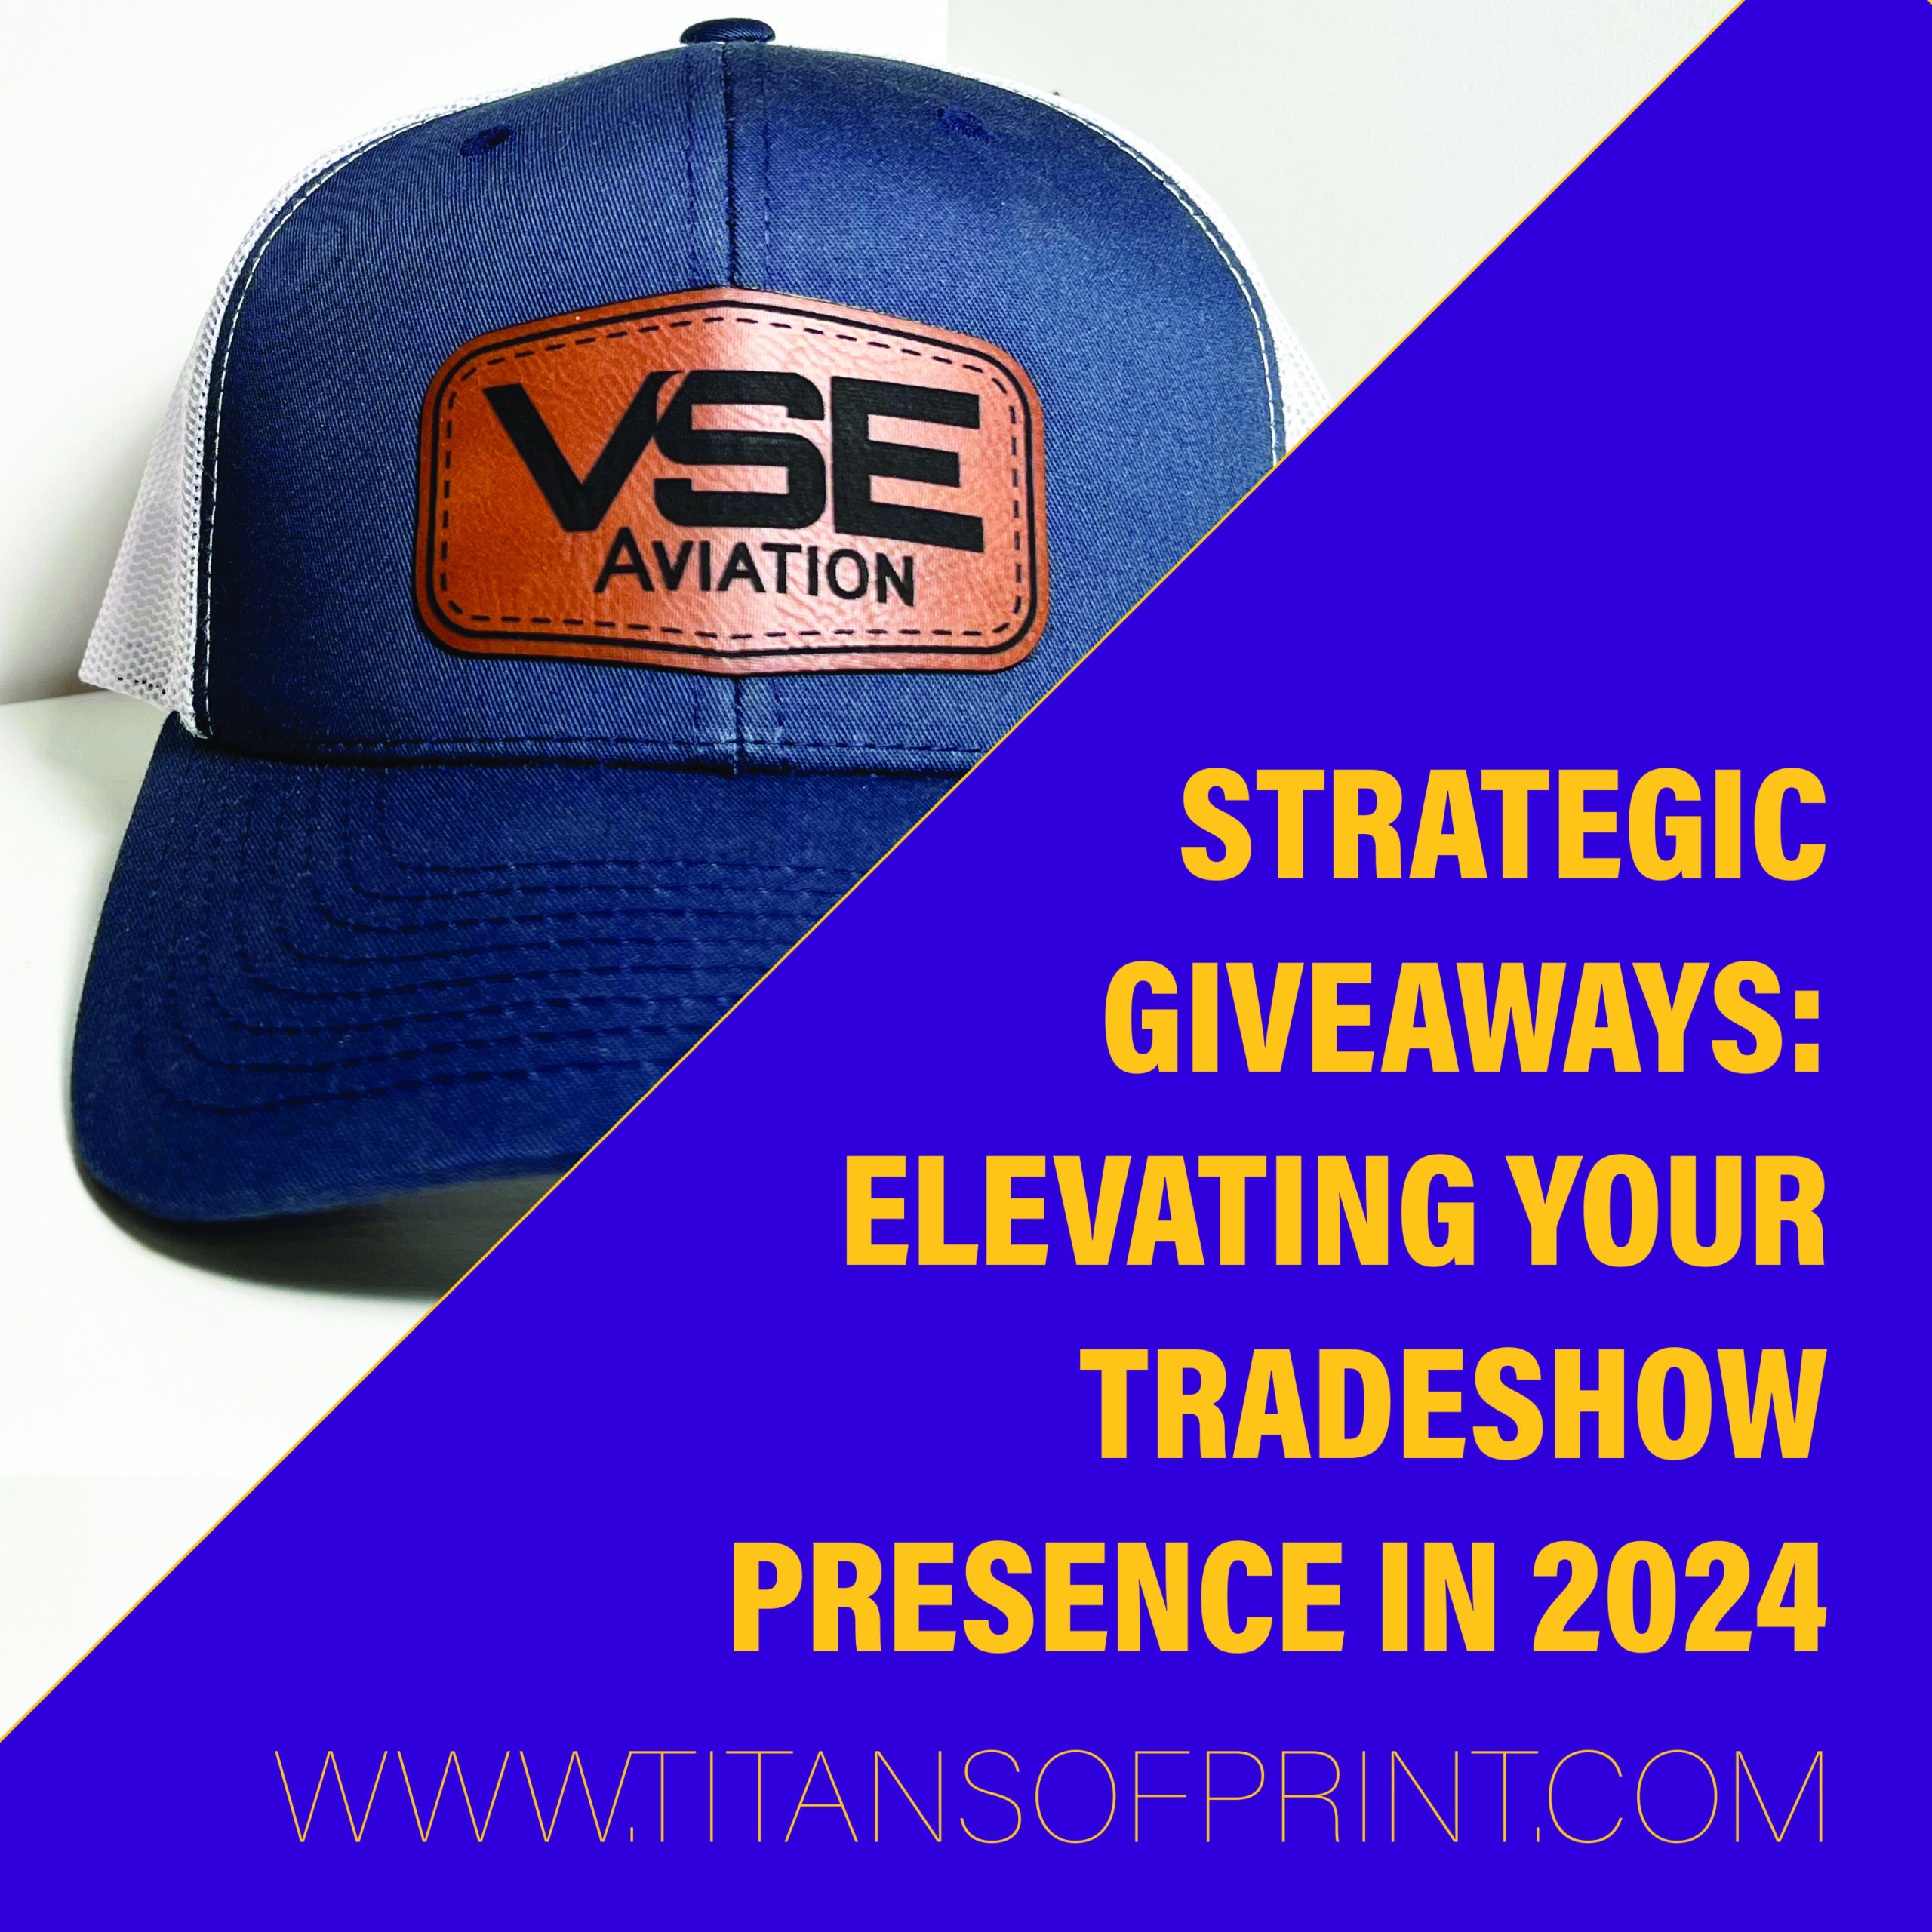 Best Giveaways for Tradeshows in 2024